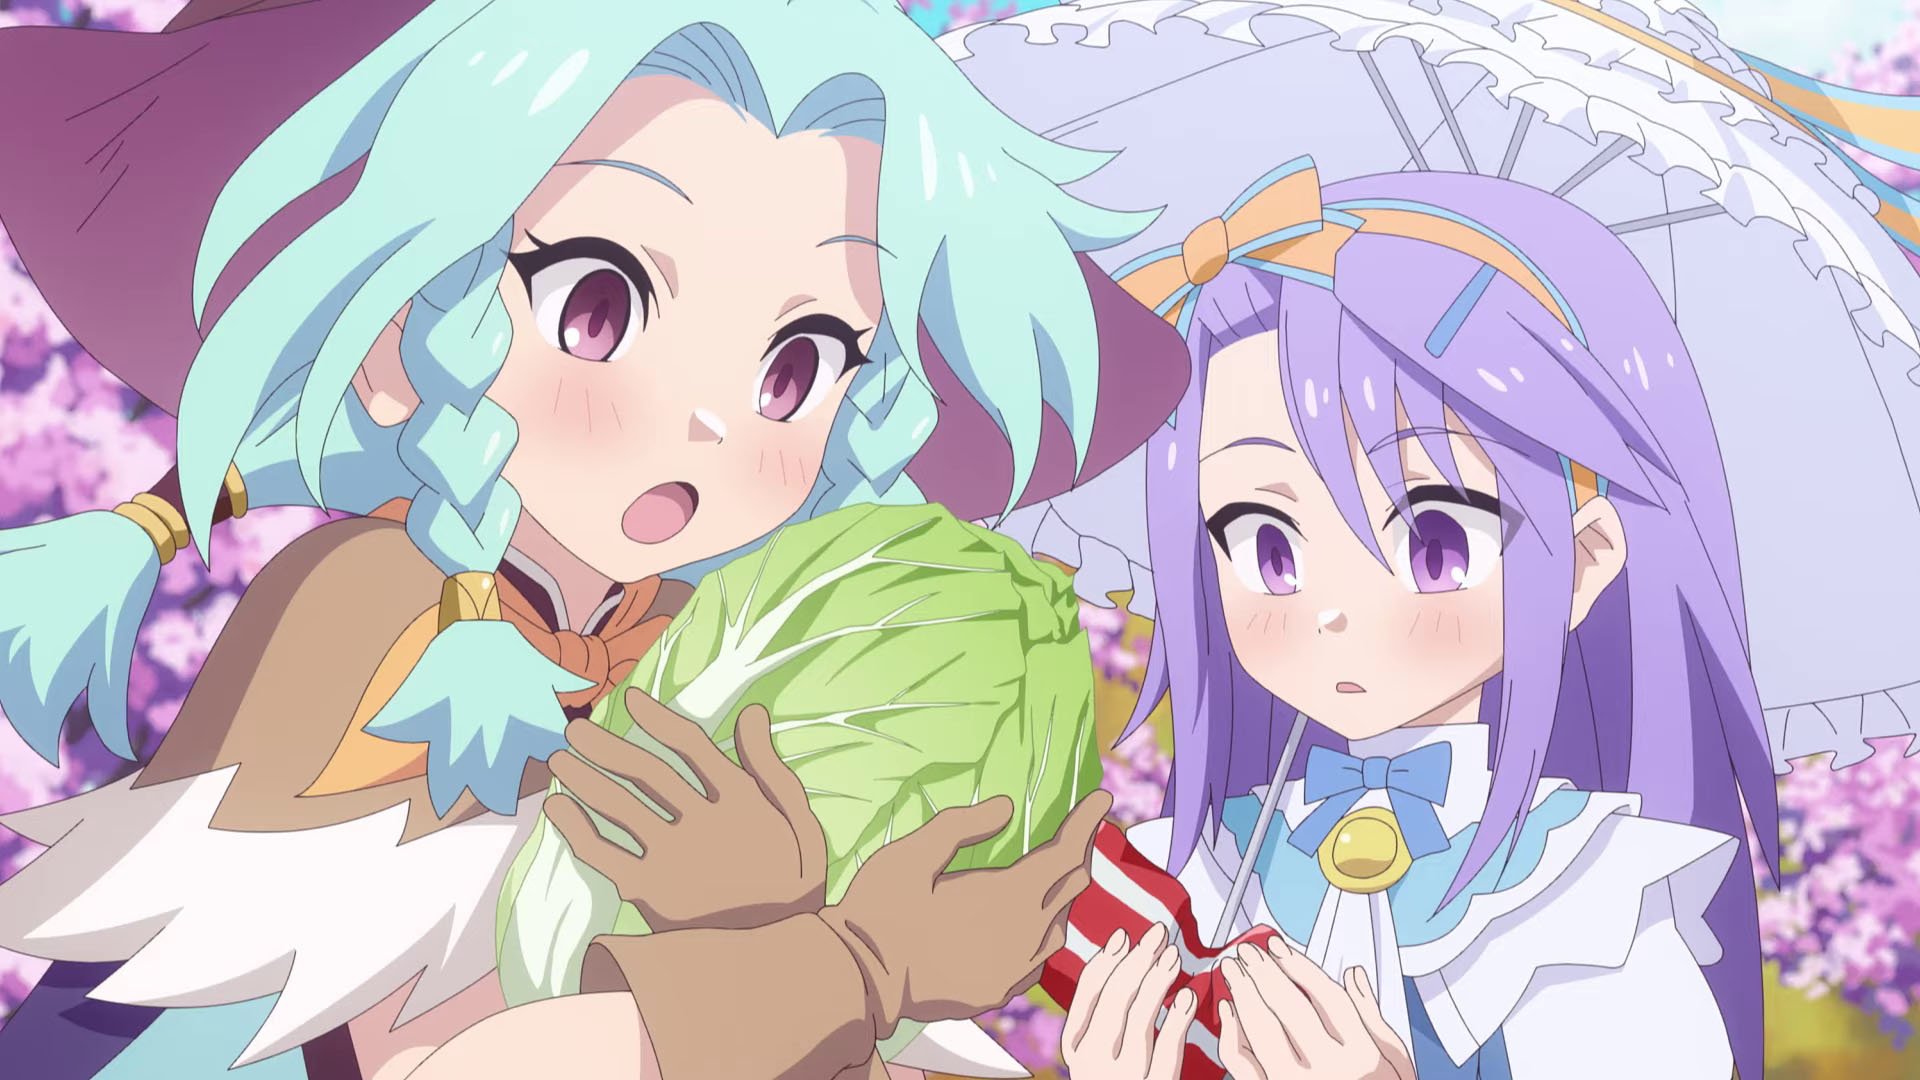 A key art for Rune Factory 3 Special